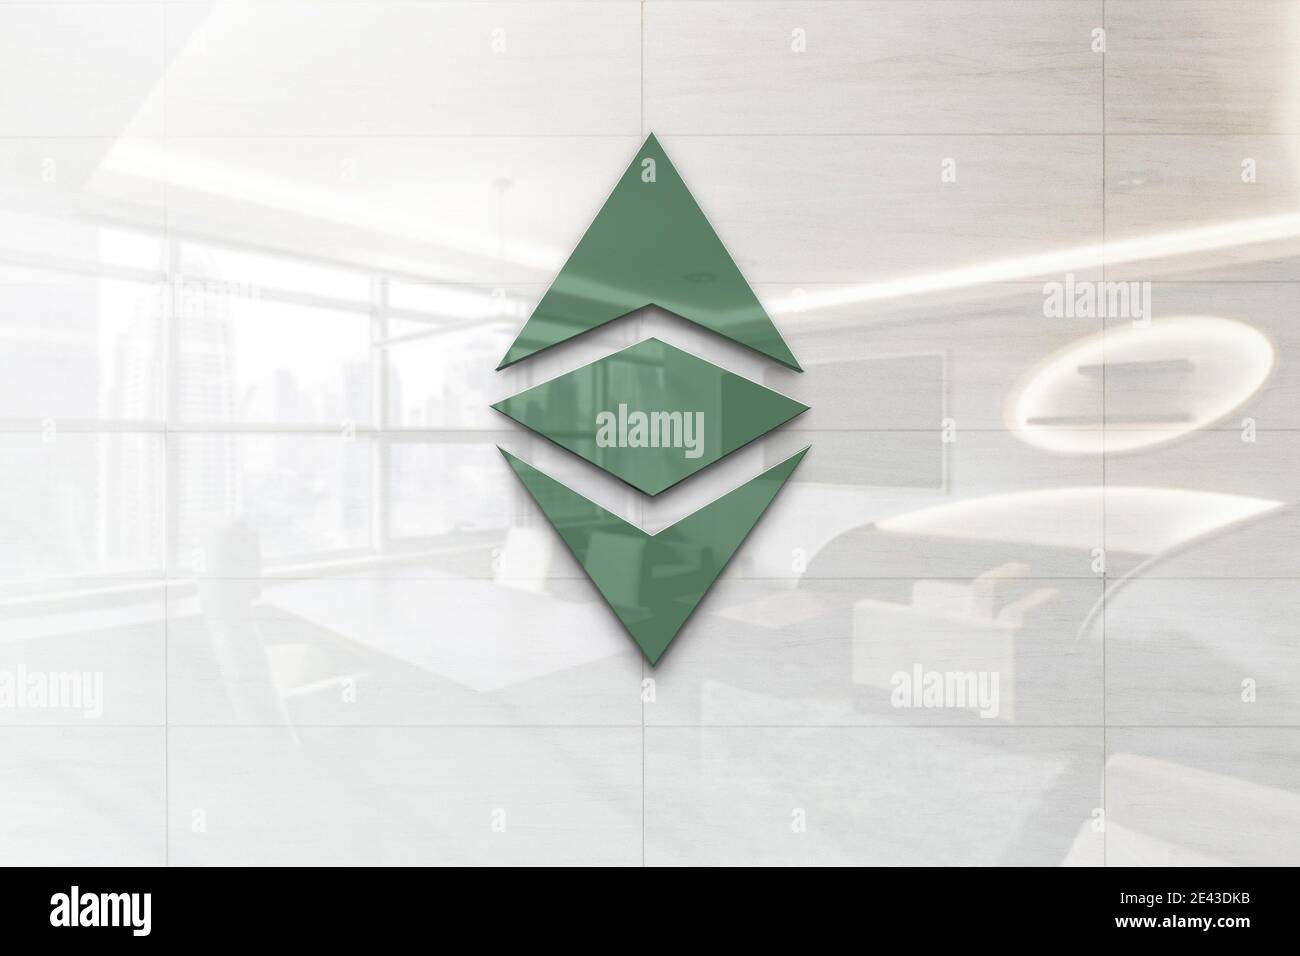 ethereum classic logo on reflective business wall plaque Stock Photo